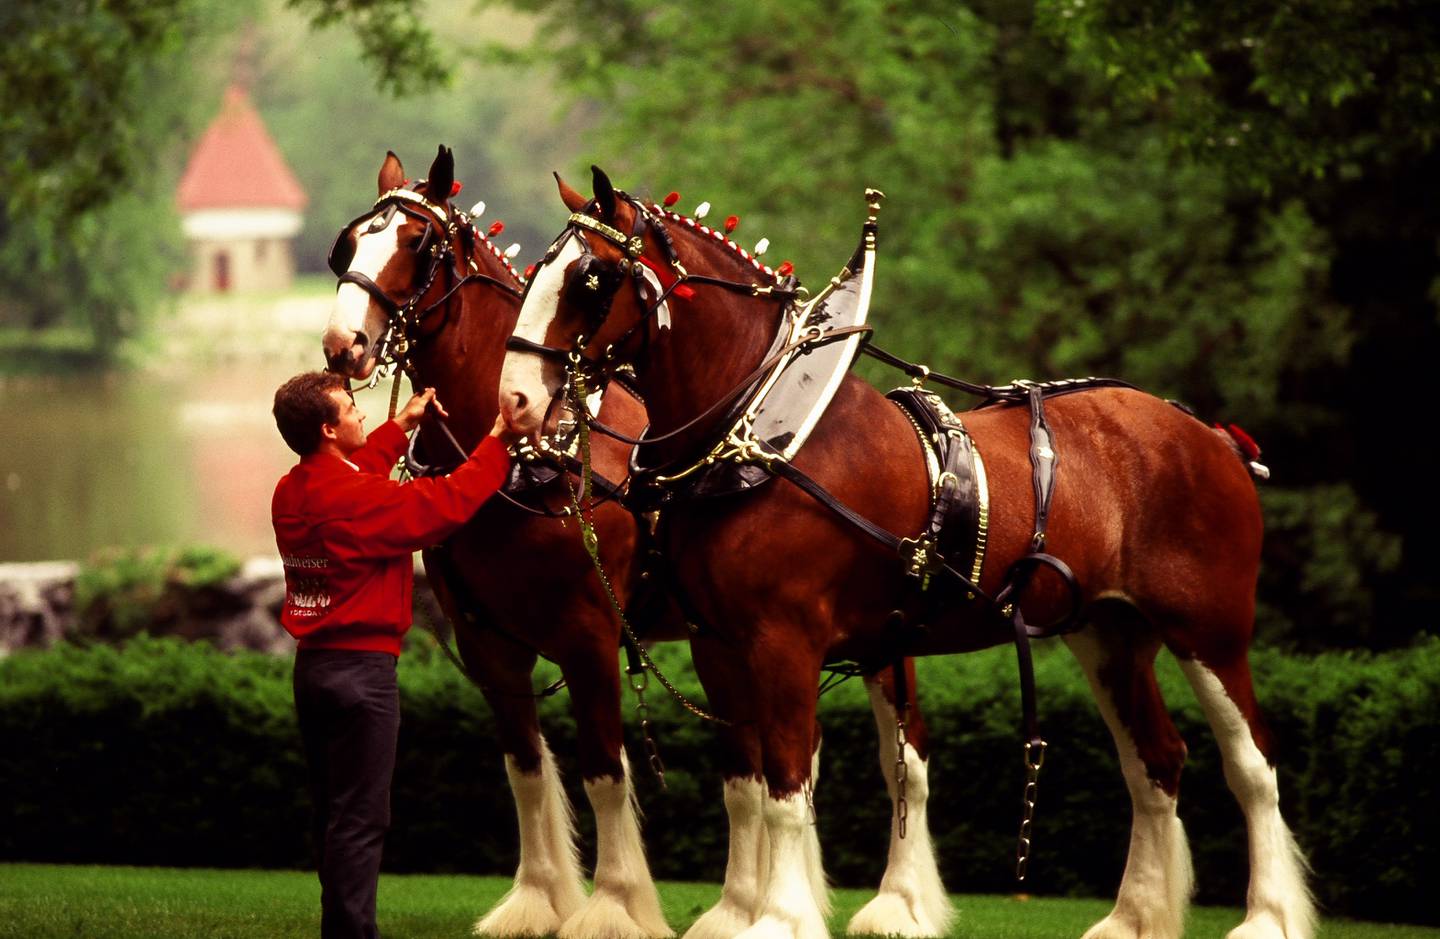 Two of the famous Budweiser Clydesdales. The Clydesdale horses used for promotions and commercials by the Anheuser-Busch Brewing Company.